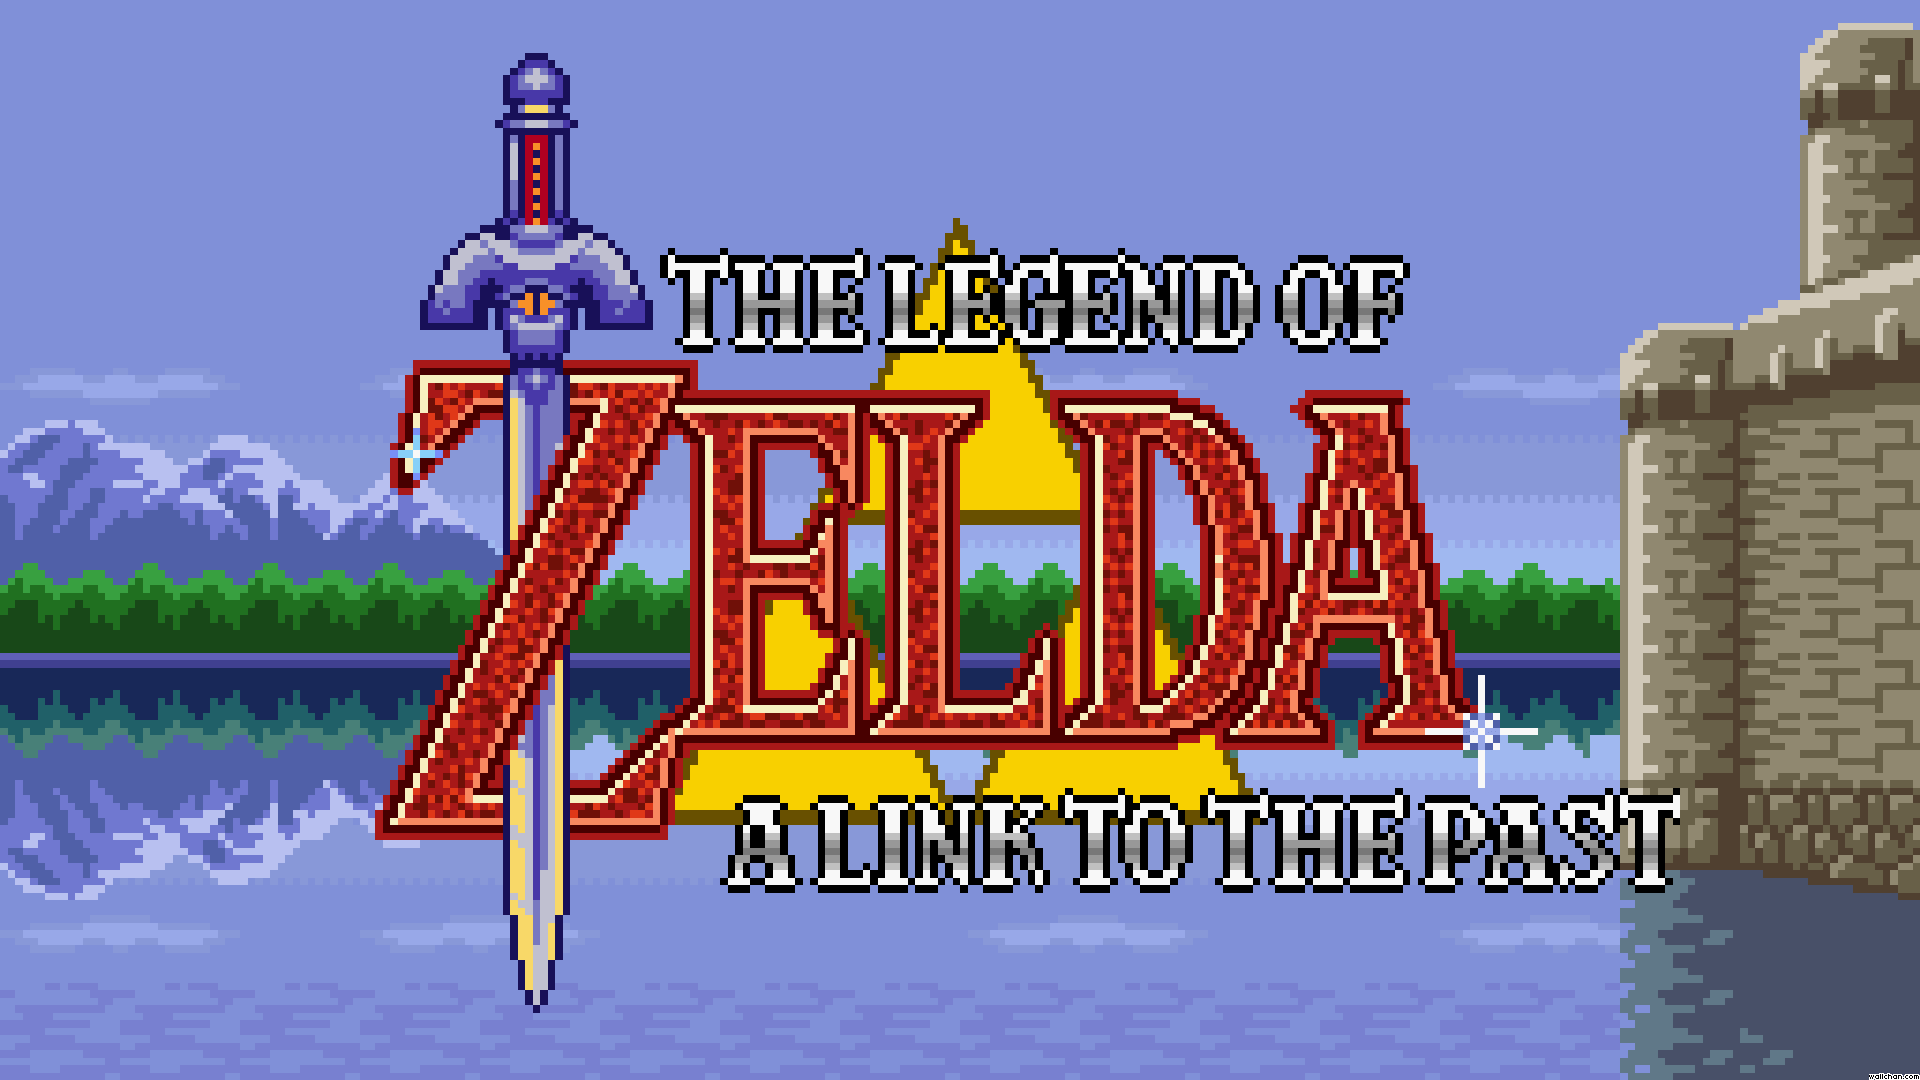 The Legend of Zelda A Link to the Past Nintendo Game Analise